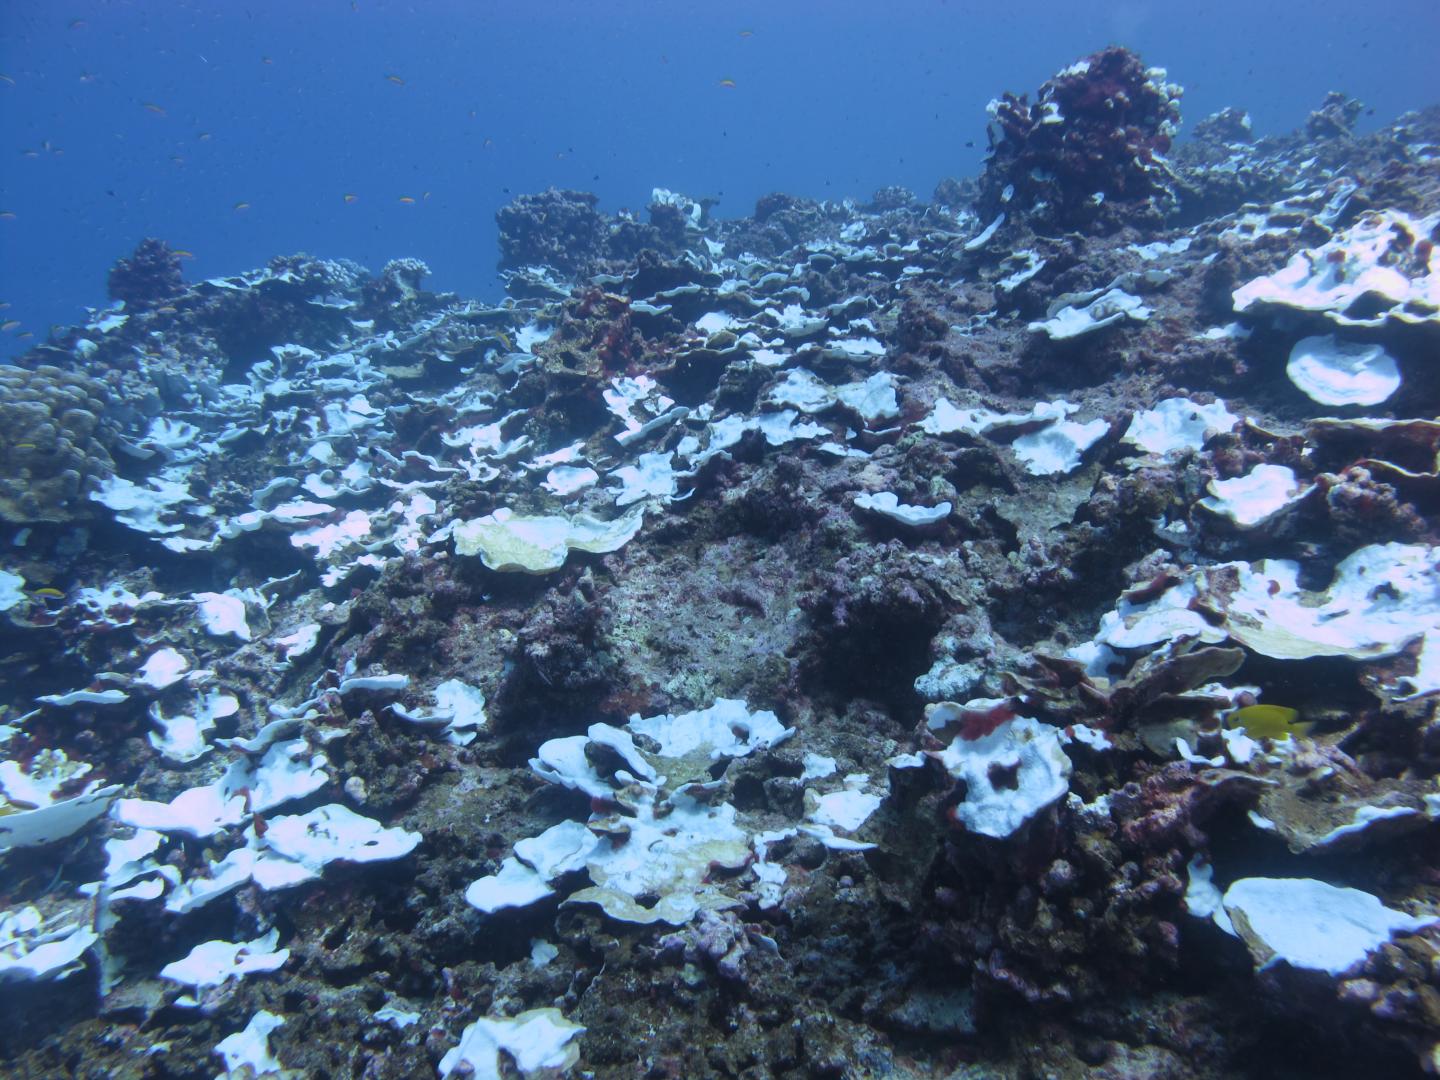 Study Tracks Severe Bleaching Events on a Pacific Coral Reef Over Past Century